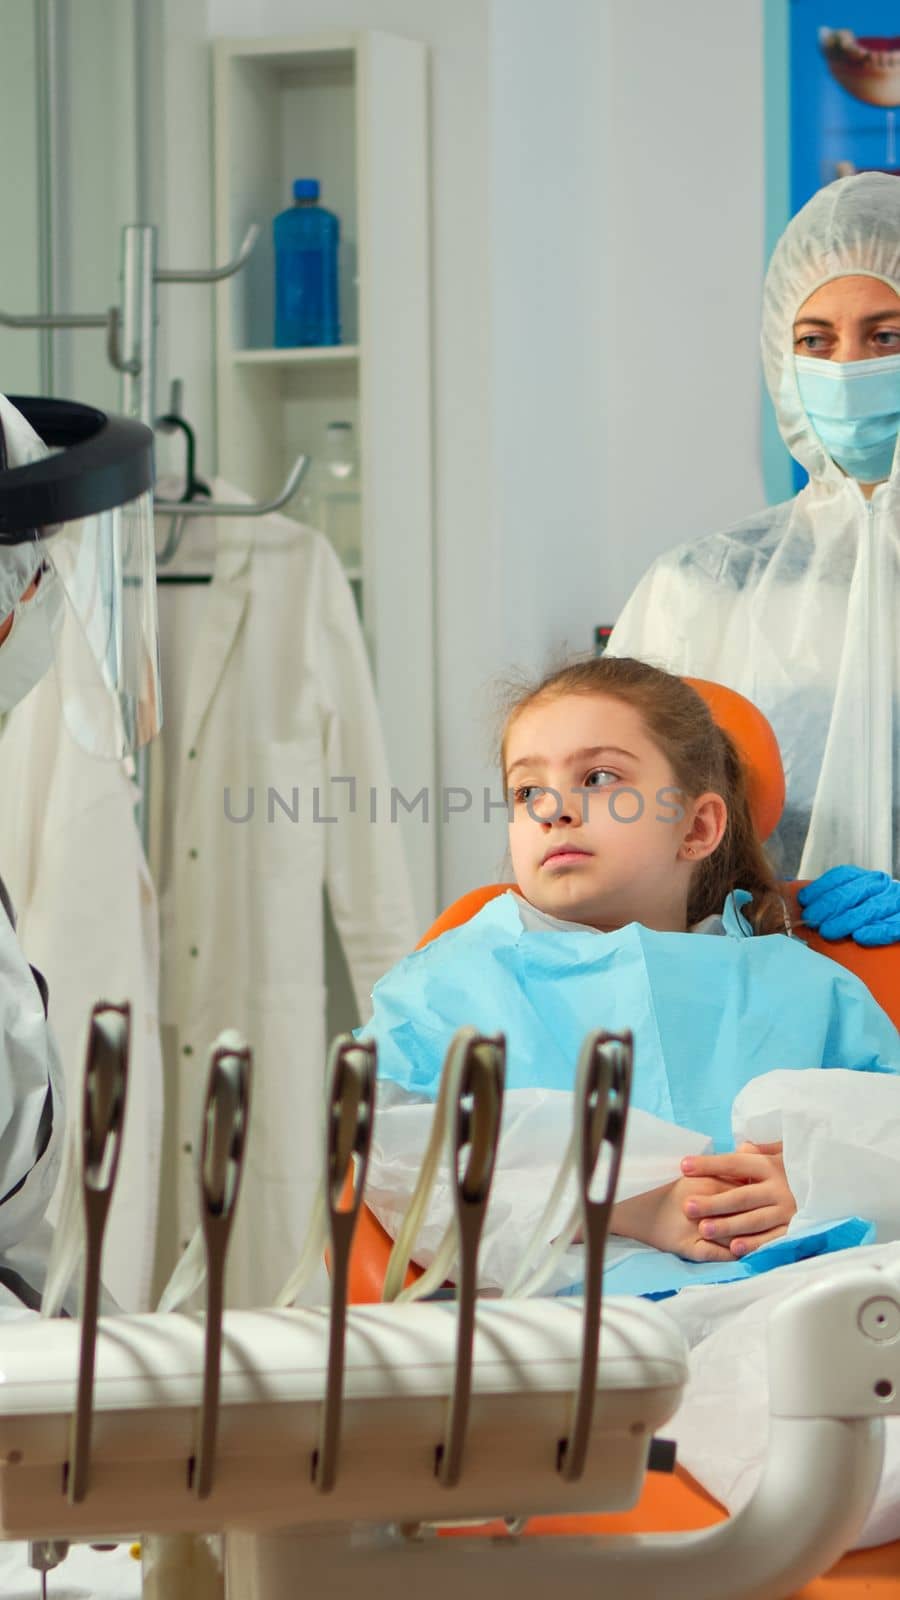 Orthodontist in protection coverall speaking to mother of kid patient with toothache during covid-19 in stomatological office. Concept of new normal dentist visit in coronavirus outbreak